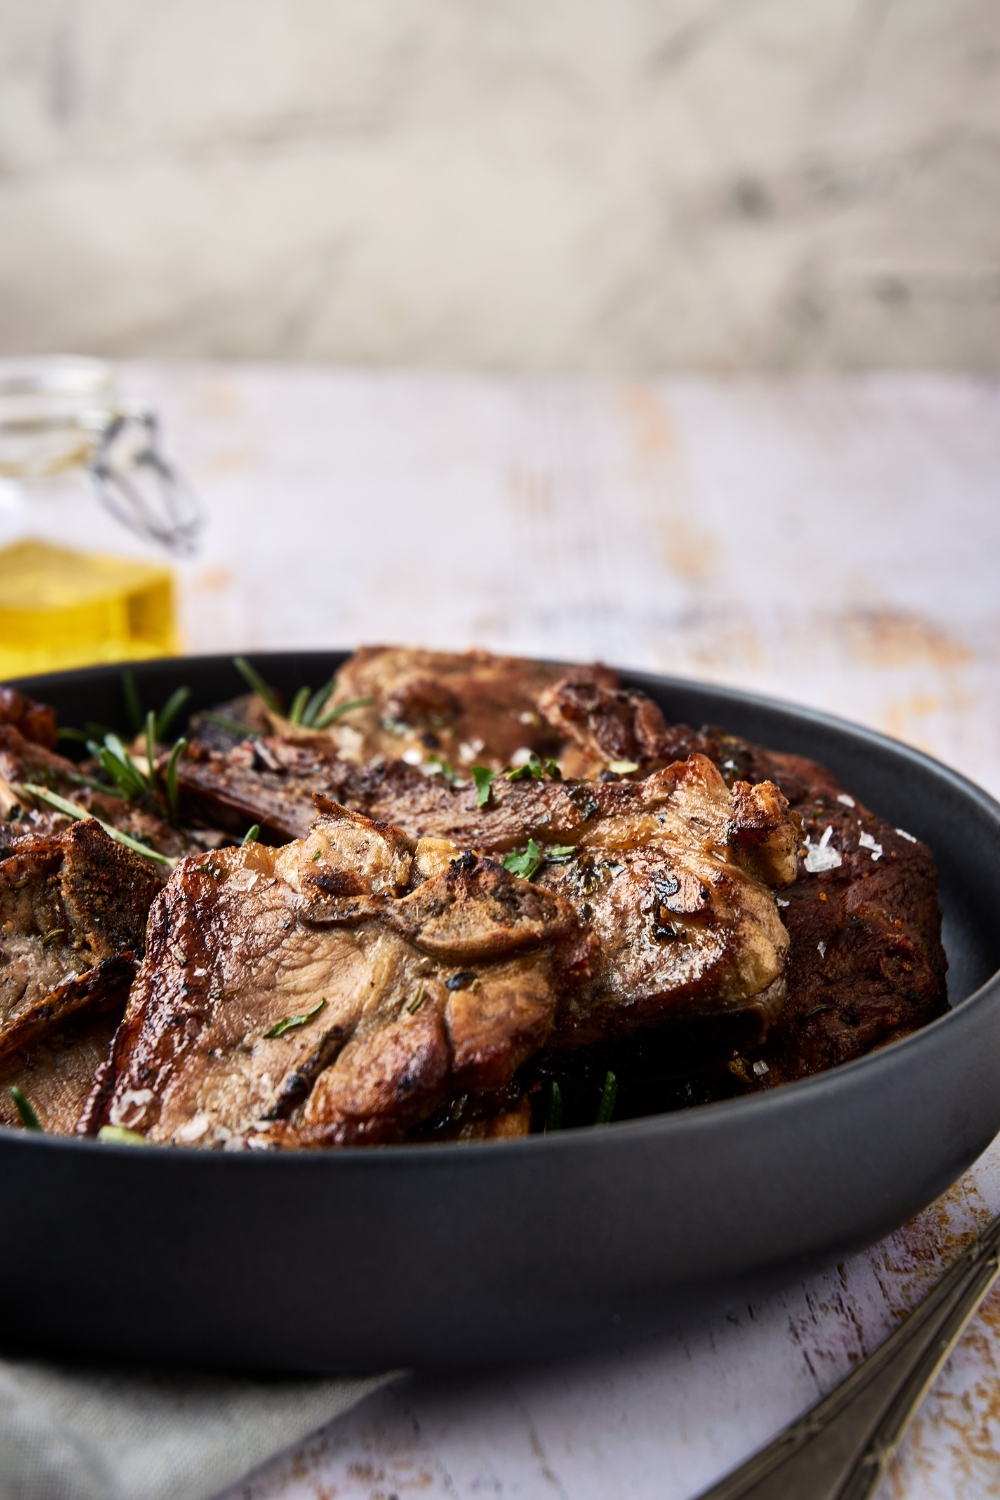 A black dish is full of lamb shoulder chops. The chops are garnished with fresh herbs.